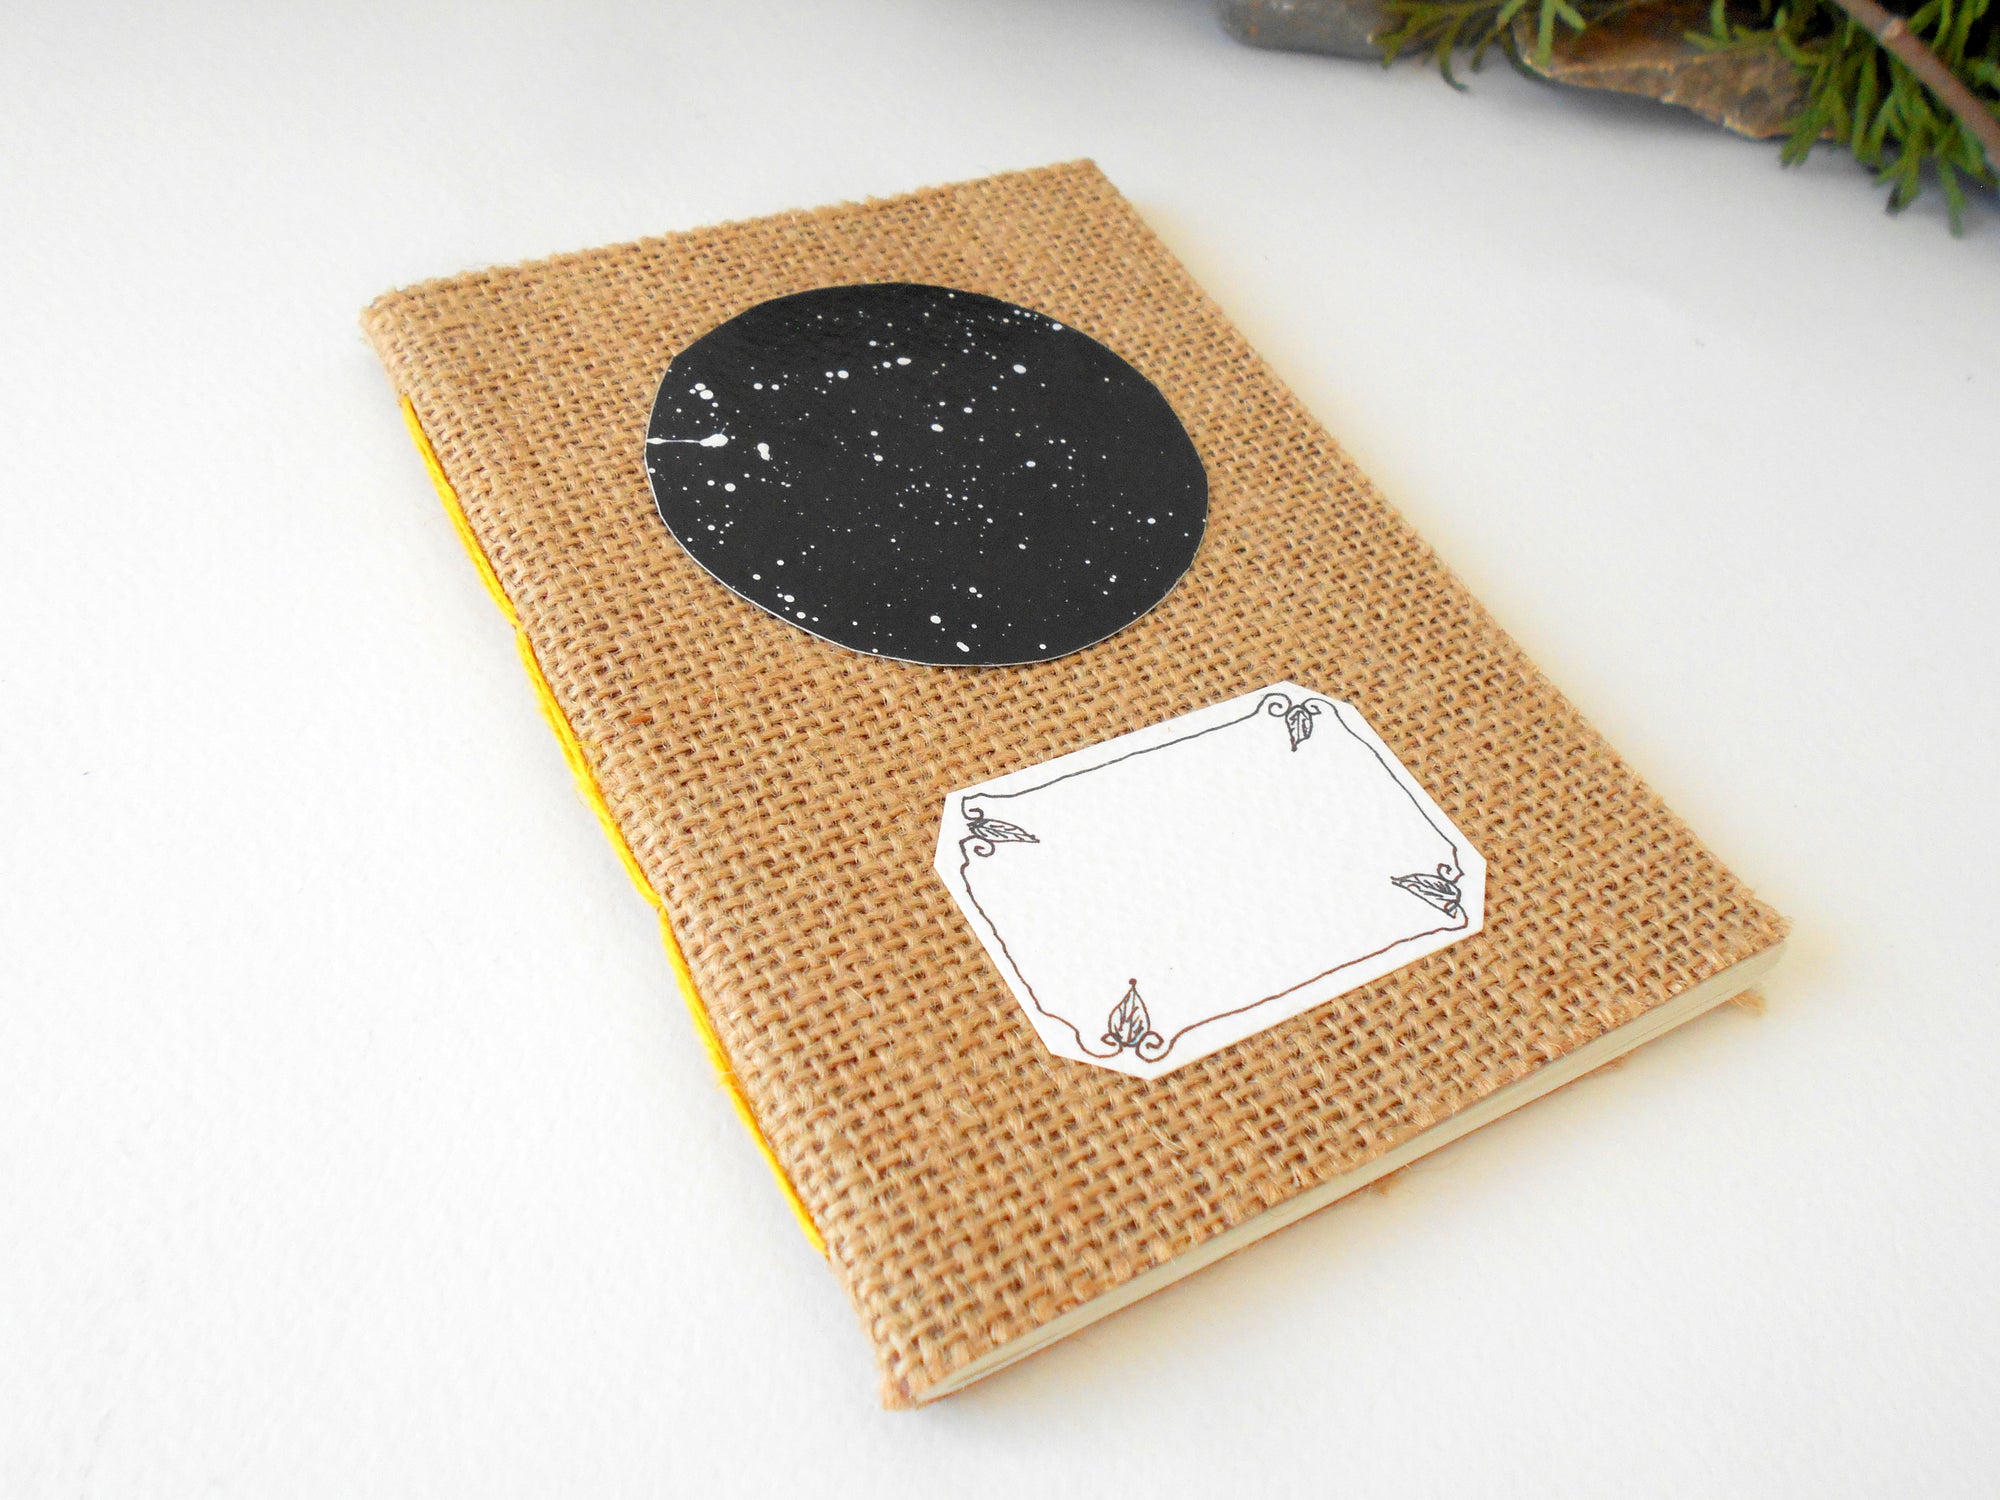 Art Star Sky Burlap notebook- Hemp cords- 100 recycled pages